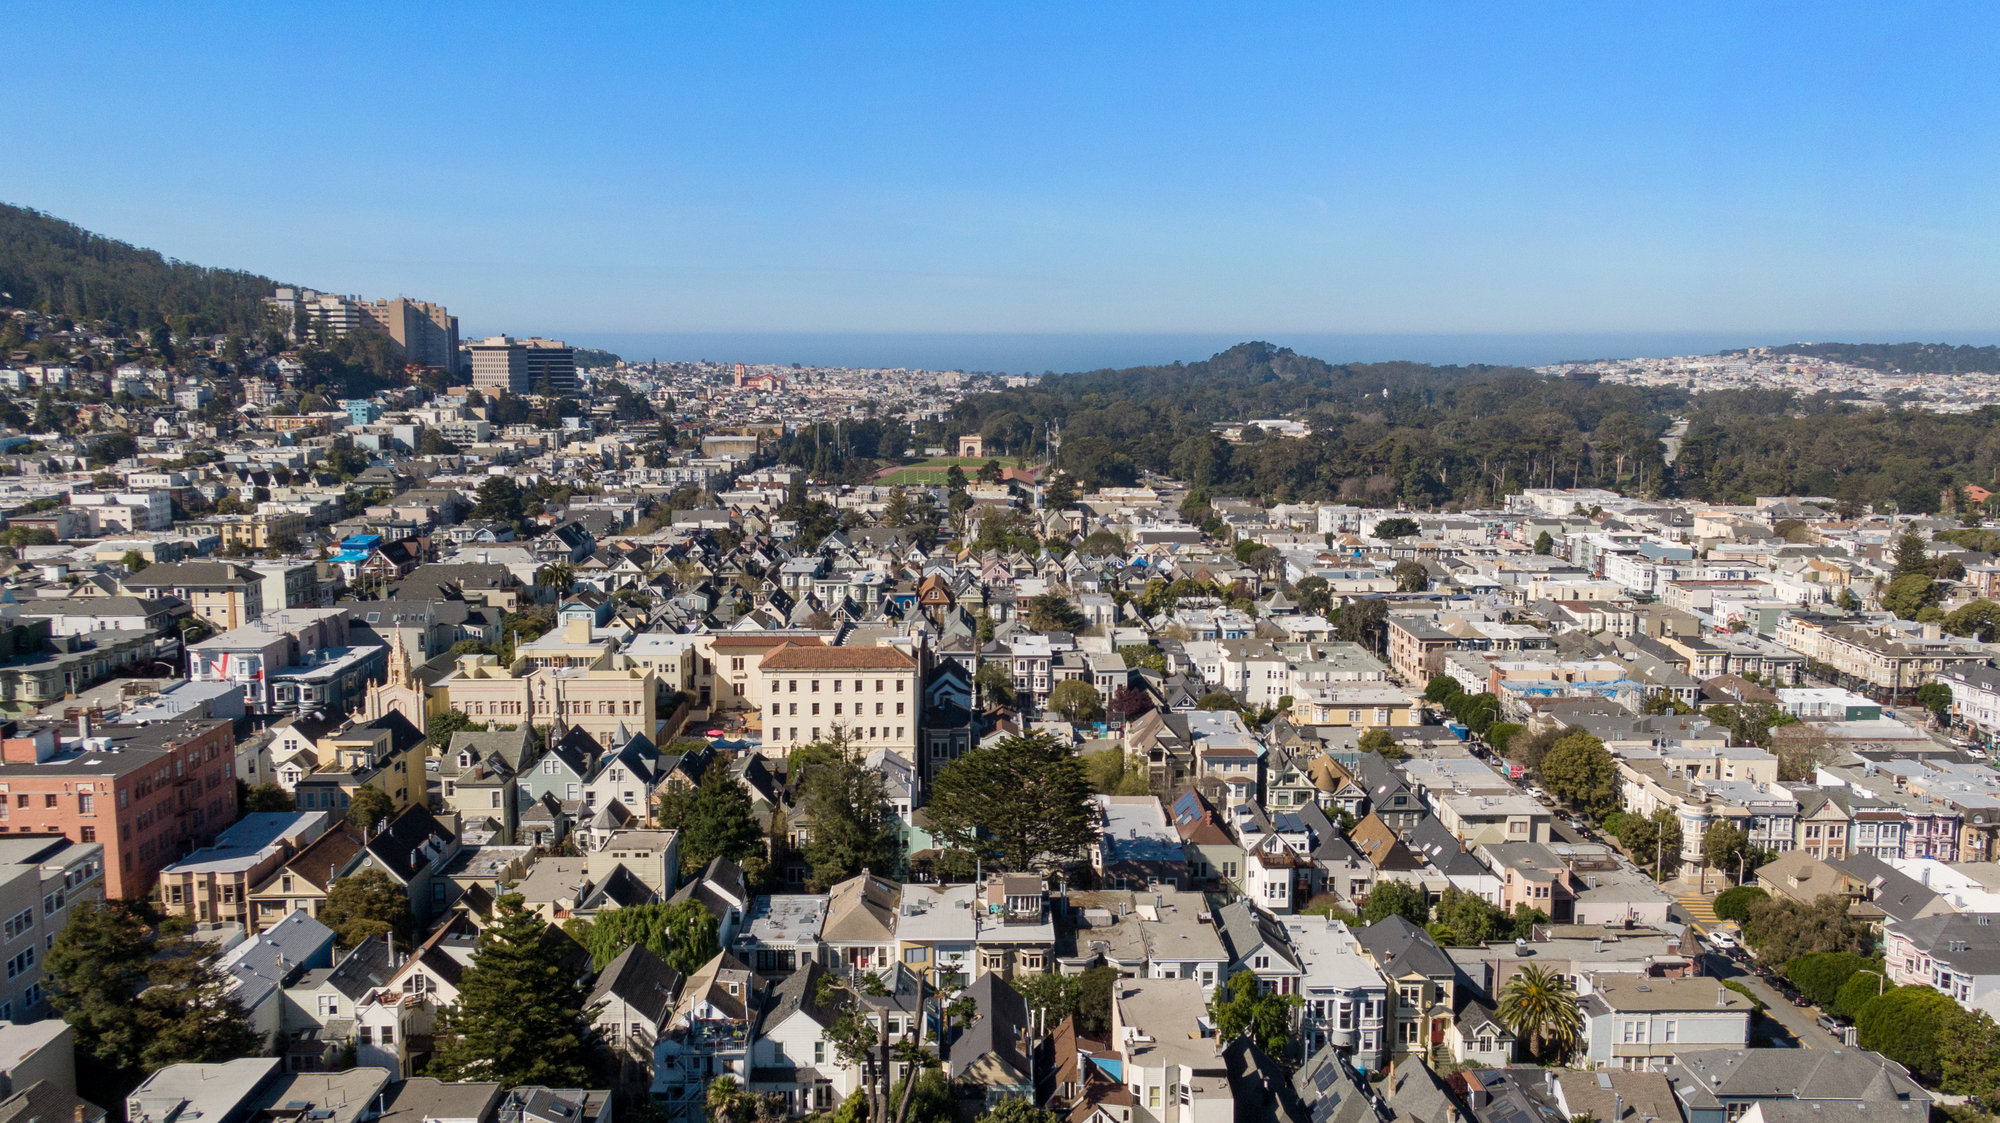 Aerial view of Buena Vista as seen from 39 Delmar, featuring views of Golden Gate Park and the San Francisco Bay